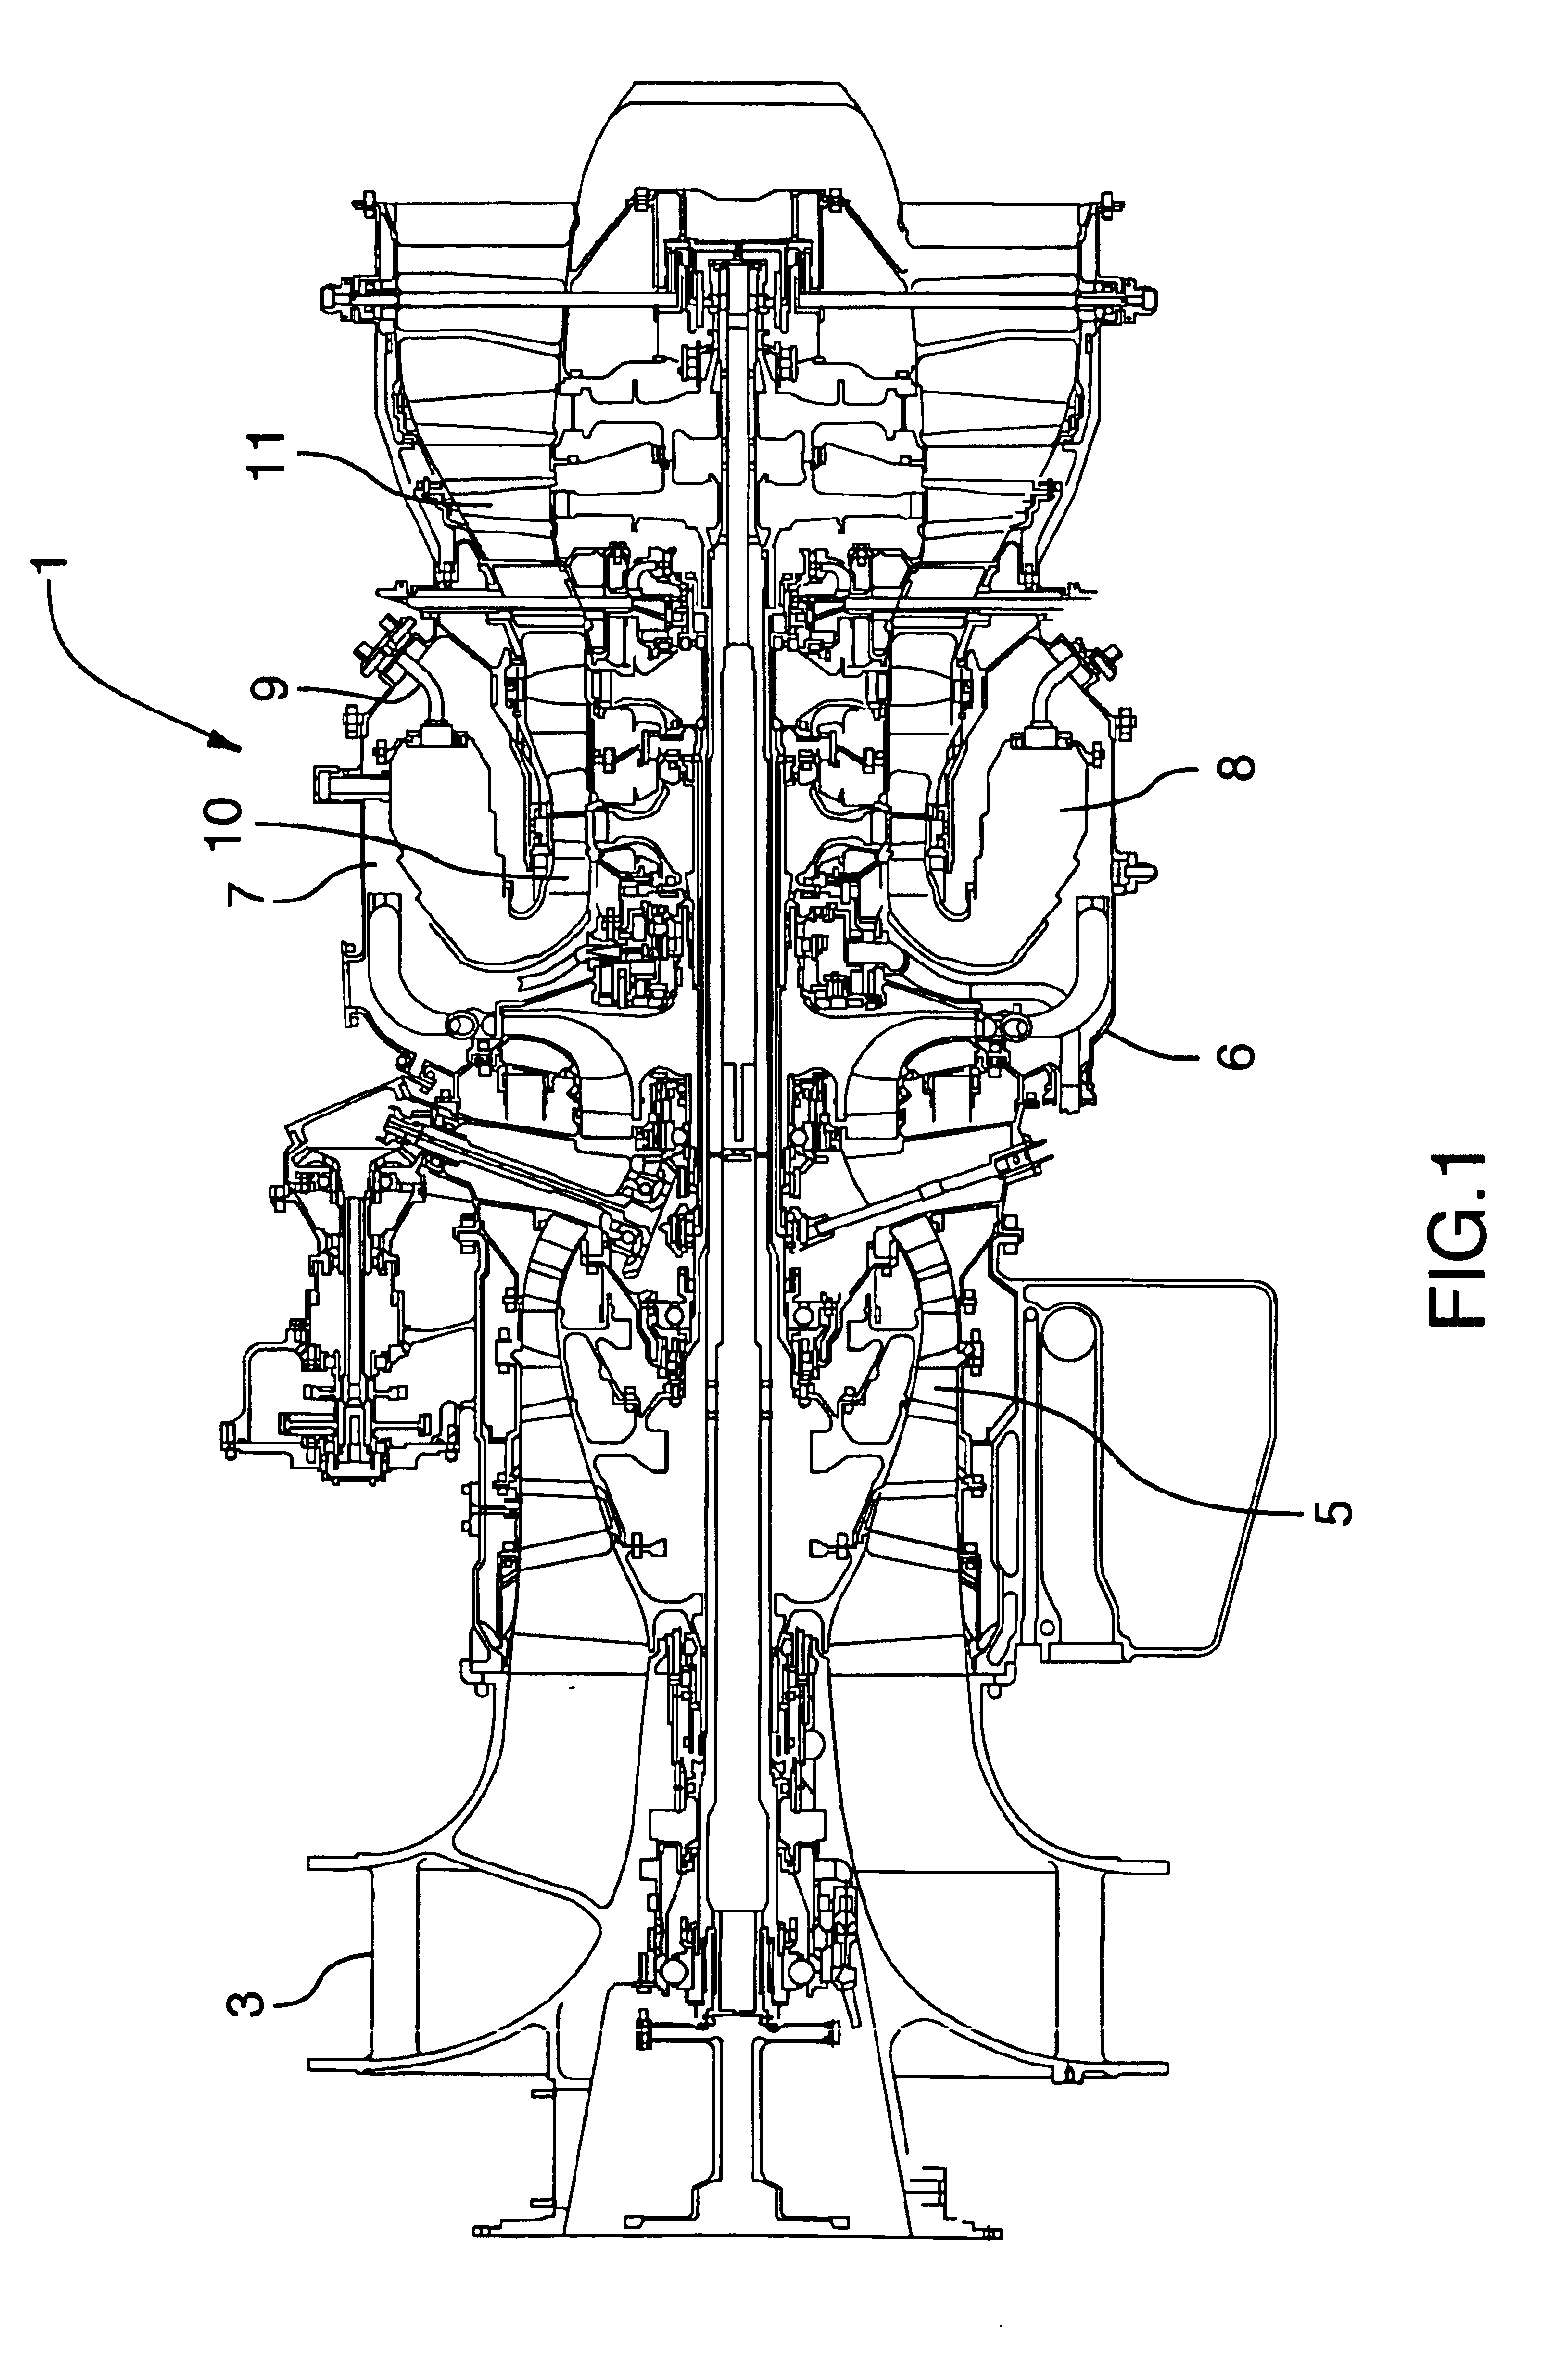 Natural gas fuel nozzle for gas turbine engine